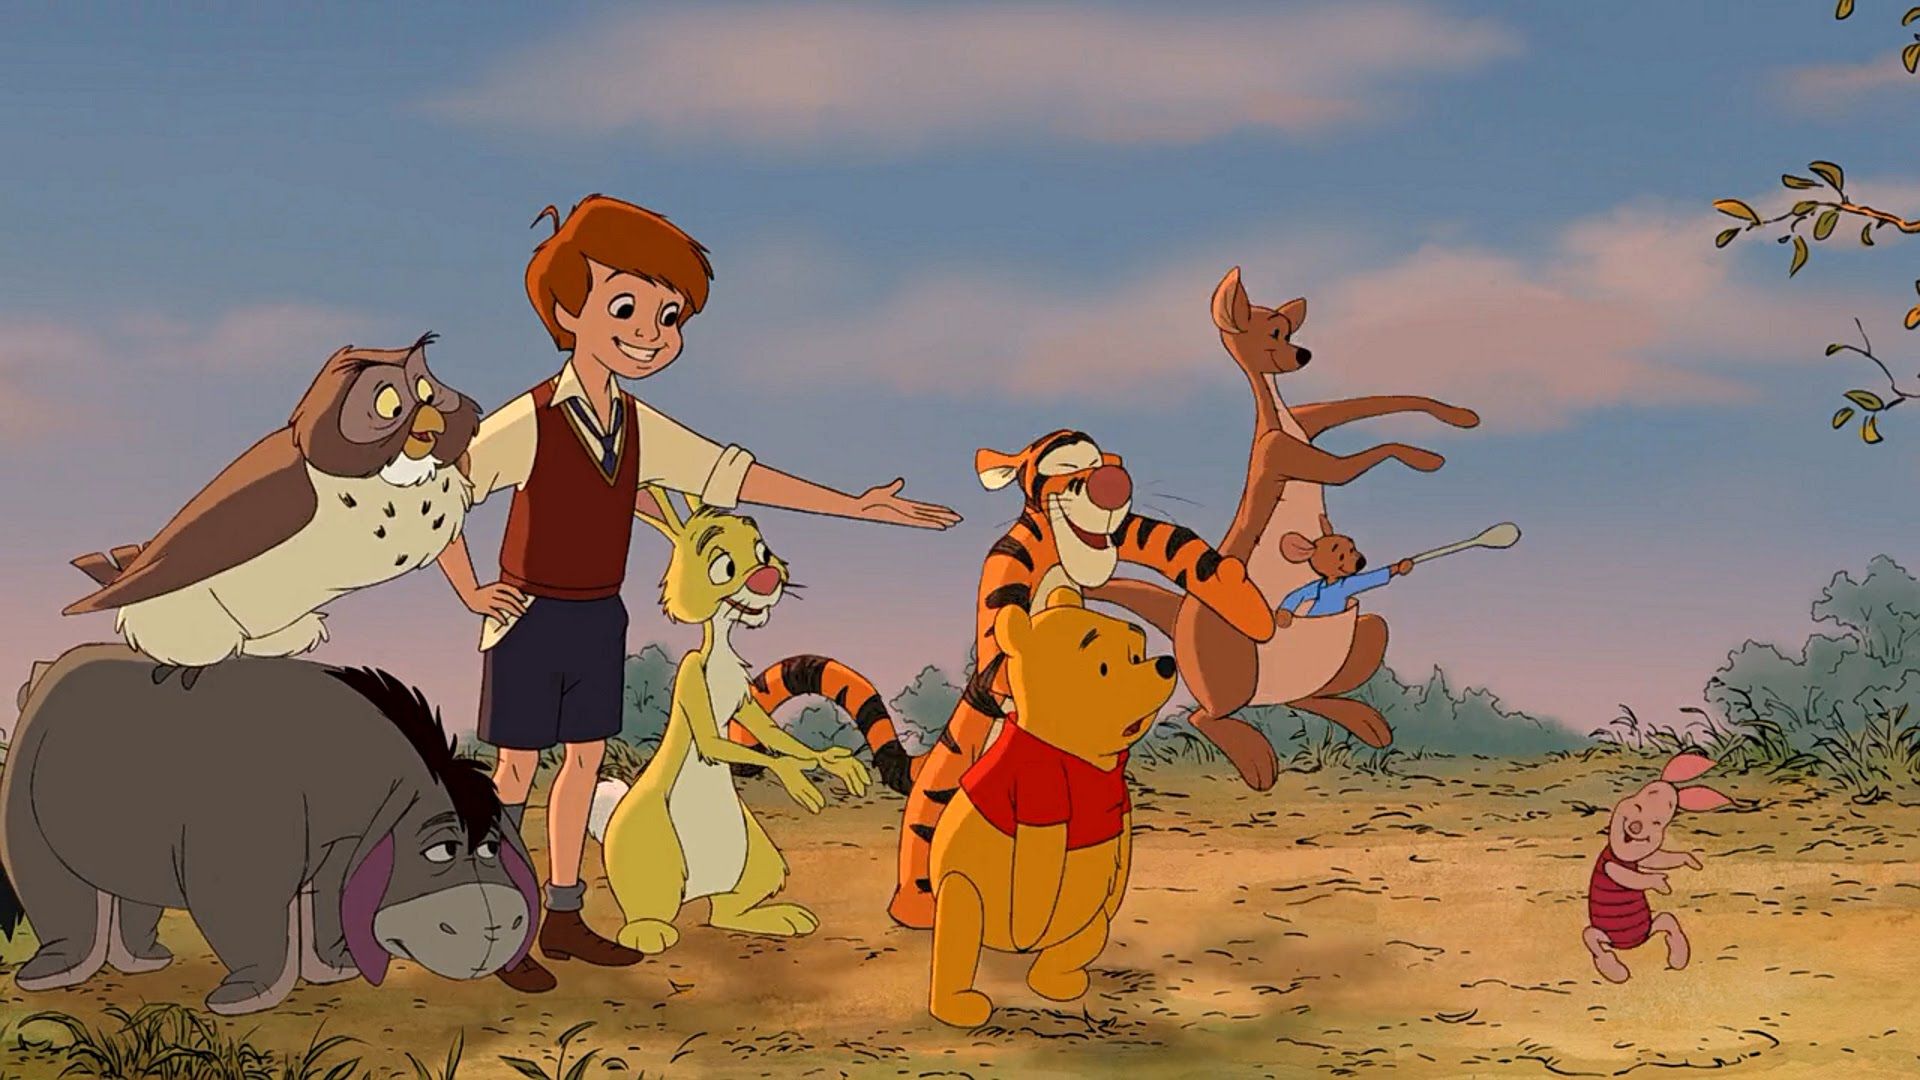 25 Surprising 'Winnie The Pooh' Facts The Good, The Bad And The Weird